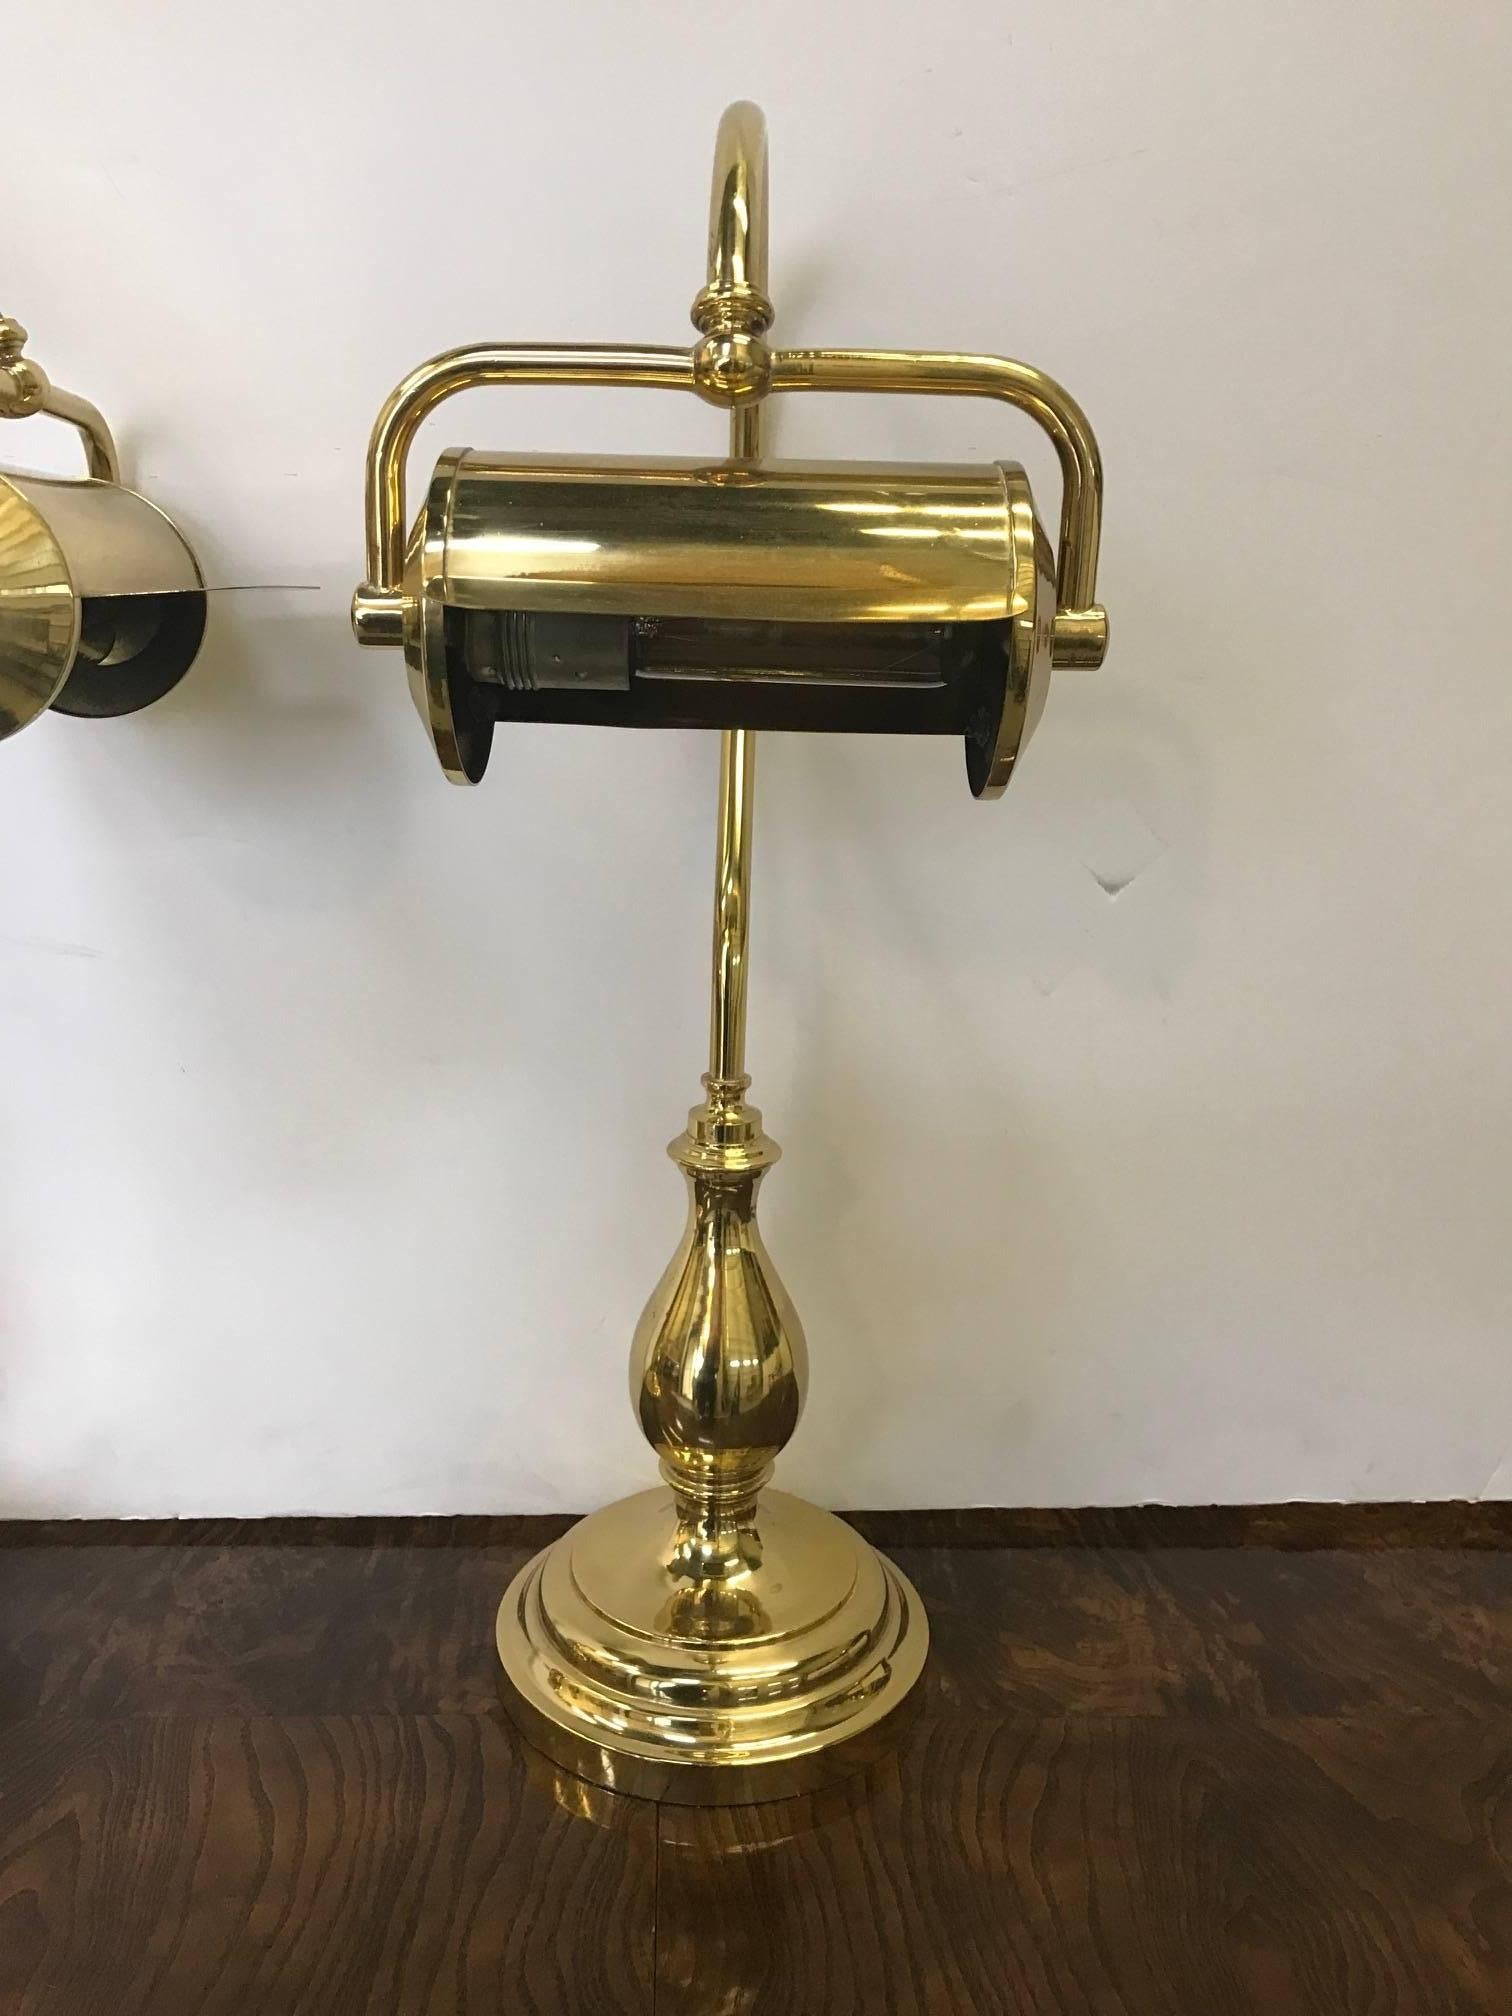 A handsome pair of brass adjustable goose neck library lamps attributed to Chapman. The front lamp with adjustable shade attached to a curved goose neck arm supported by a bulbous round plinth base. Each lamp has a switch located on the lamp cord,